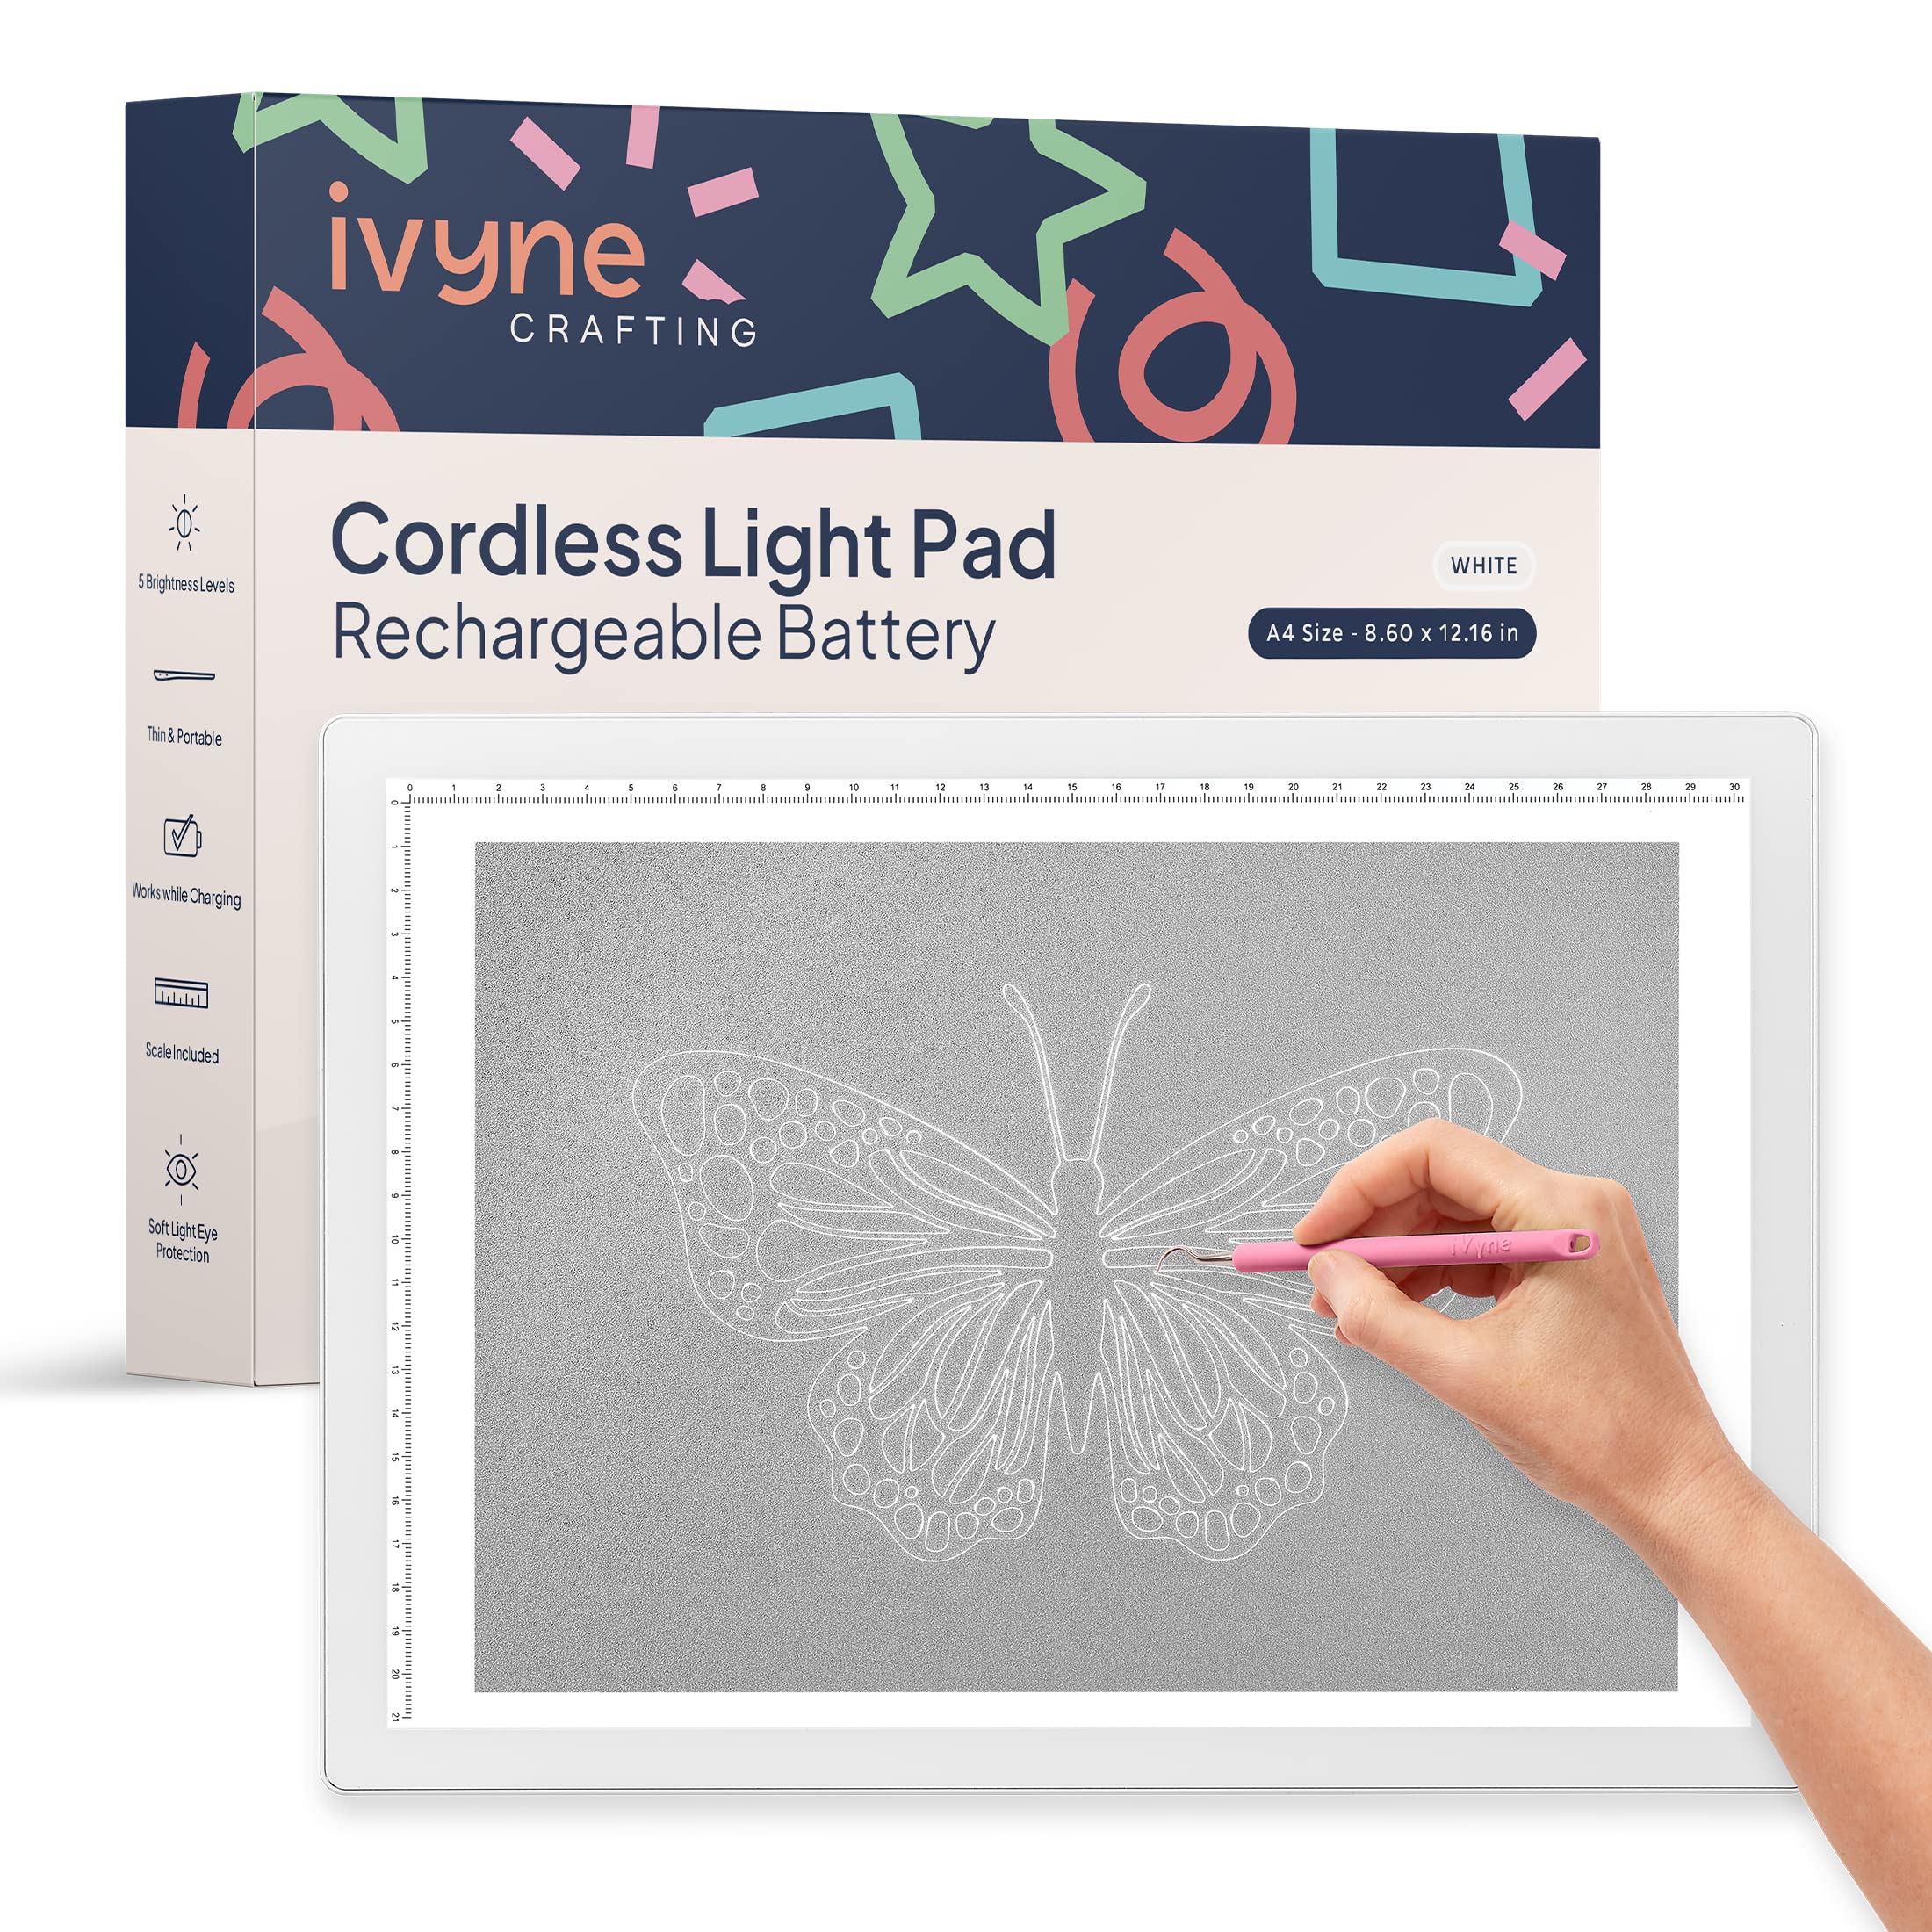  A4 Led Tracing Light Box with Carry Bag Built-in  Stand,Ultra-Thin Light Pad Powered by 1500mAh Lithium Battery for Cricut  Vinyl, Weeding Tool, Drawing Crafting Box/Board for Tracing, Sketching & HTV